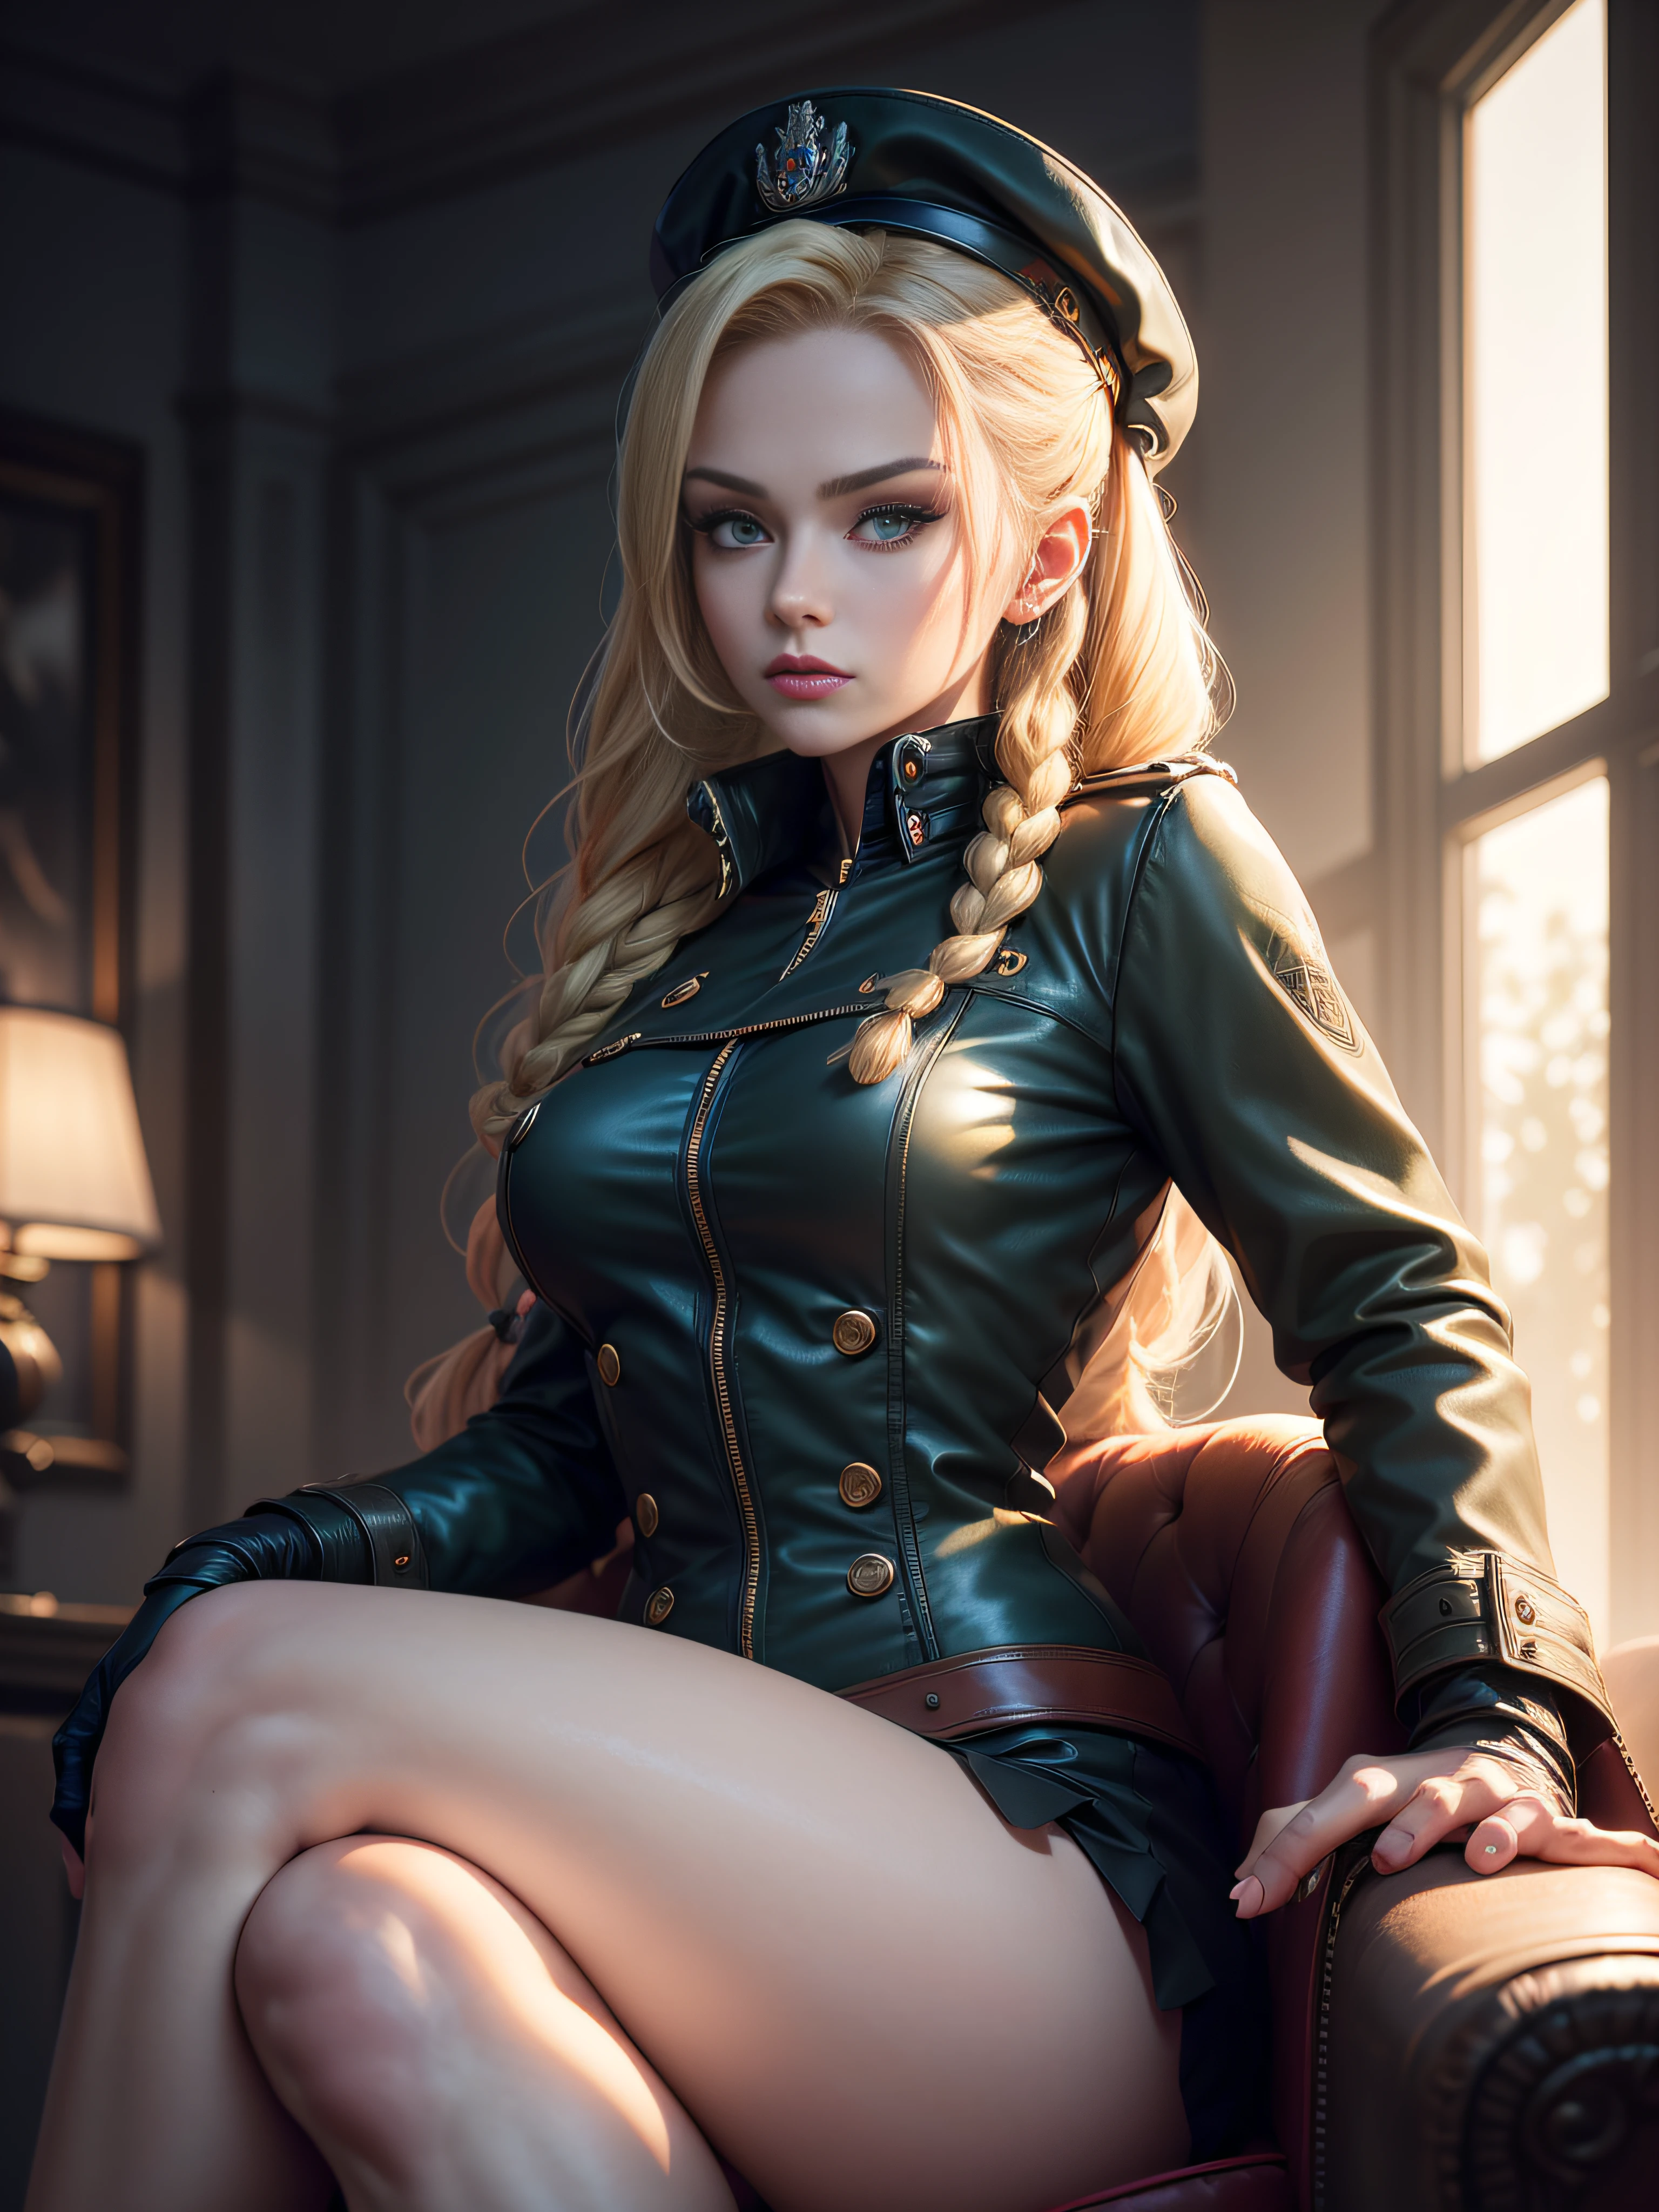 "(exquisitely detailed CG unity 8k wallpaper, masterpiece-quality with stunning realism), (best illumination, best shadow), (best quality), (elegant and demonic style:1.2), Arti modern anime. angled view, heroic pose, closeup full body portrait of stunningly beautiful 30 year old cammy from street fighter, Masterpiece, best quality, highres, mature Cammy white, twin braids, long hair, blonde hair, antenna hair, beret, (red headwear:1), blue eyes, scar on cheek, green military leotard, red gloves, fingerless gloves, camouflage, (fully clothed:1), abs, depth of field blur effect, night, full zoom, action portrait, photorealistic. cinematic lighting, highly detailed. best quality, 4k, Better hand, perfect anatomy, leaning forward, foreshortening effects, coy flirty sexy expression, foreshortening effect, (piercing eyes:0.8), surrounded by an ominous and dark atmosphere, accentuated by dramatic and striking lighting, imbued with a sense of surreal fantasy". wearing laced military boots:1.5), sitting (wearing an opened British Military jacket:1.3) (mature face:0.5)